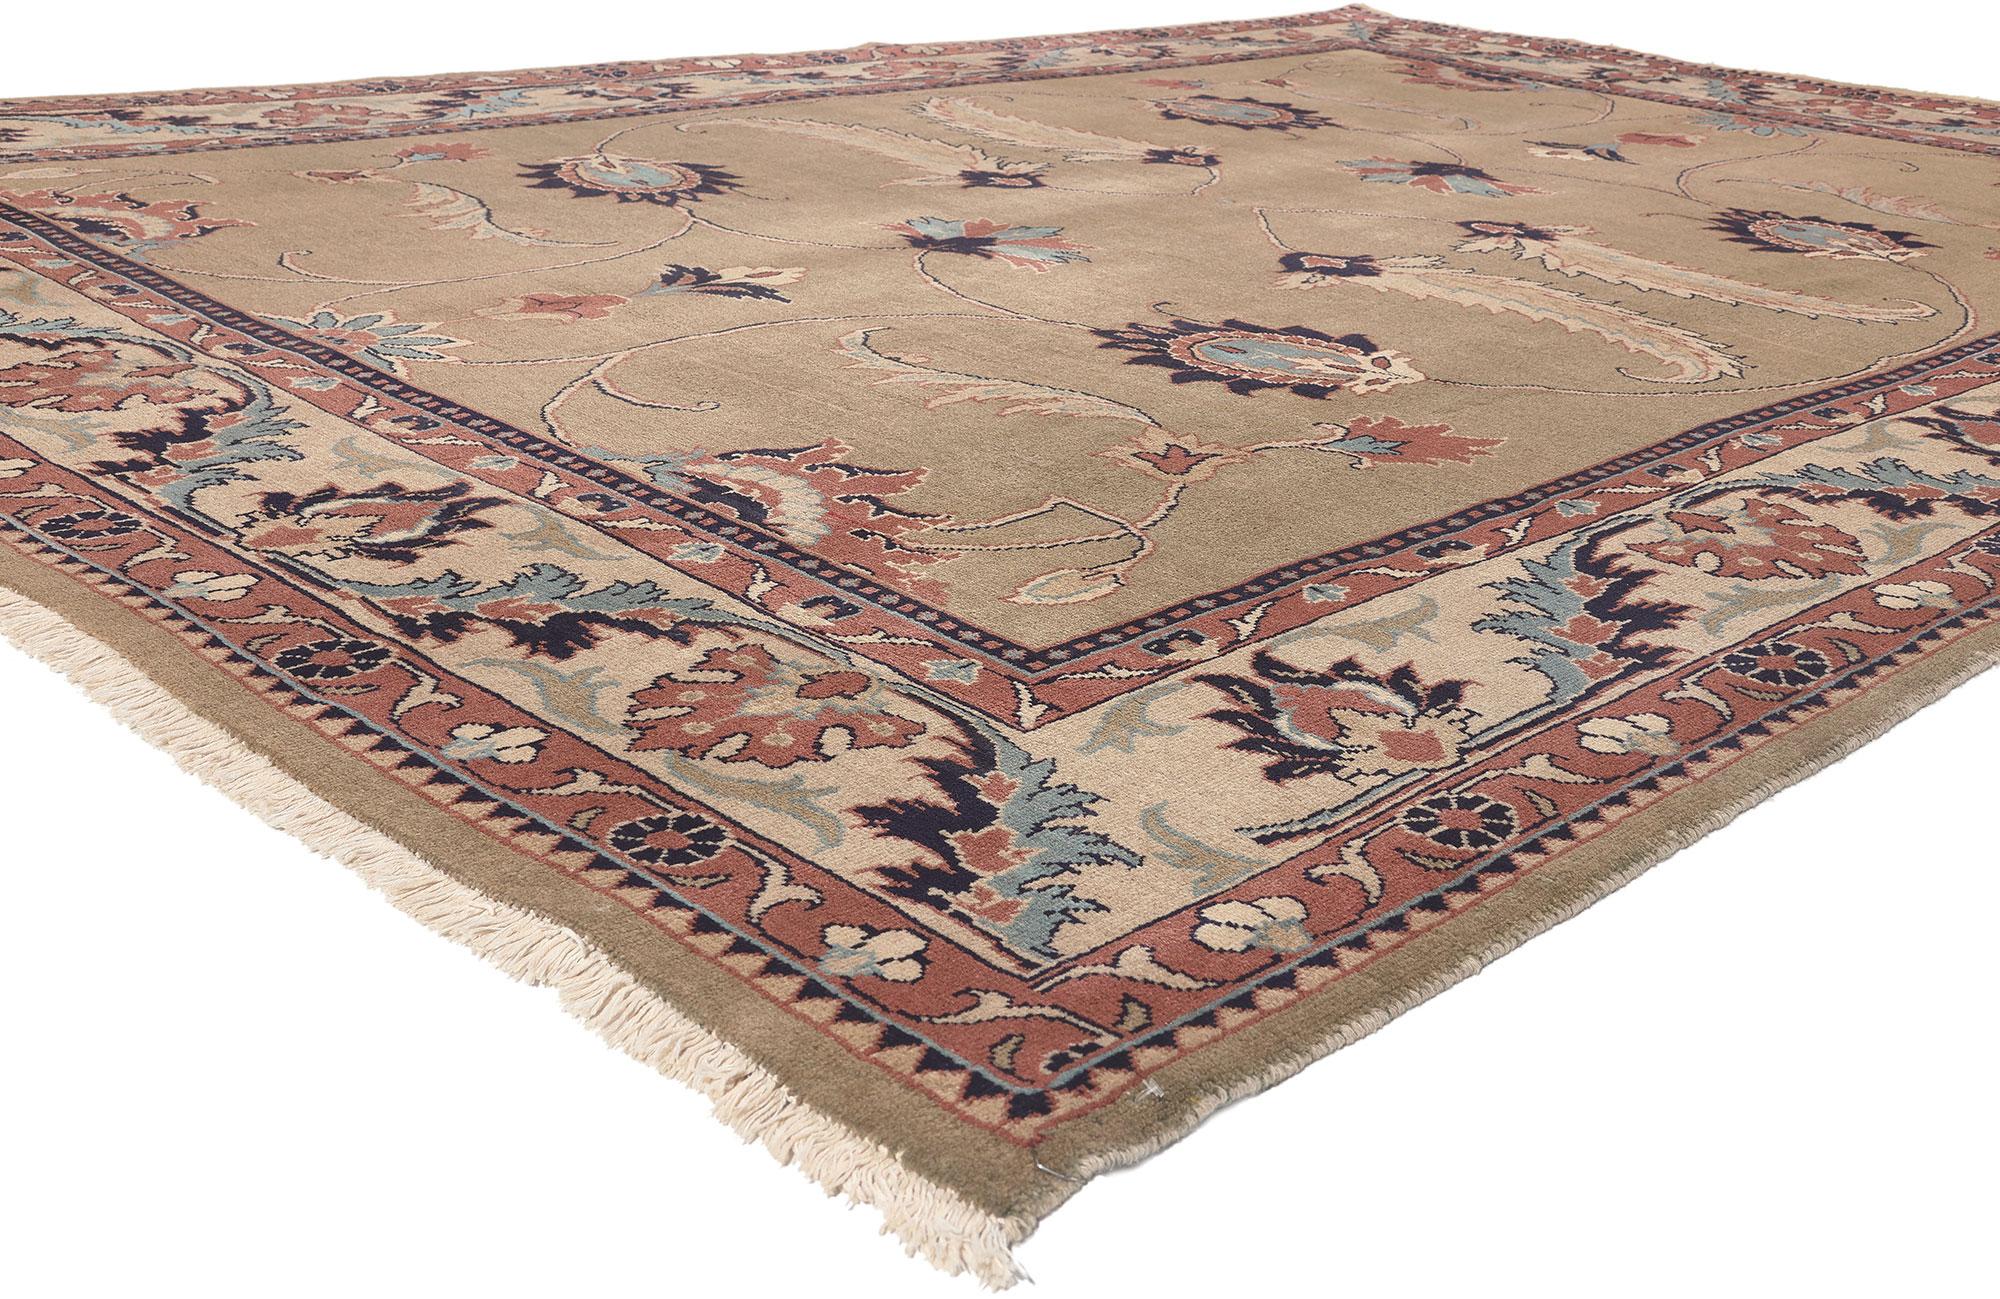 75086 Vintage Persian Mahal Rug, 08'05 x 12'00. 
Art Nouveau meets Biophilic Design in this hand knotted wool vintage Persian Mahal rug. The naturalistic design elements and analogous earthy hues woven into this piece work together resulting in a